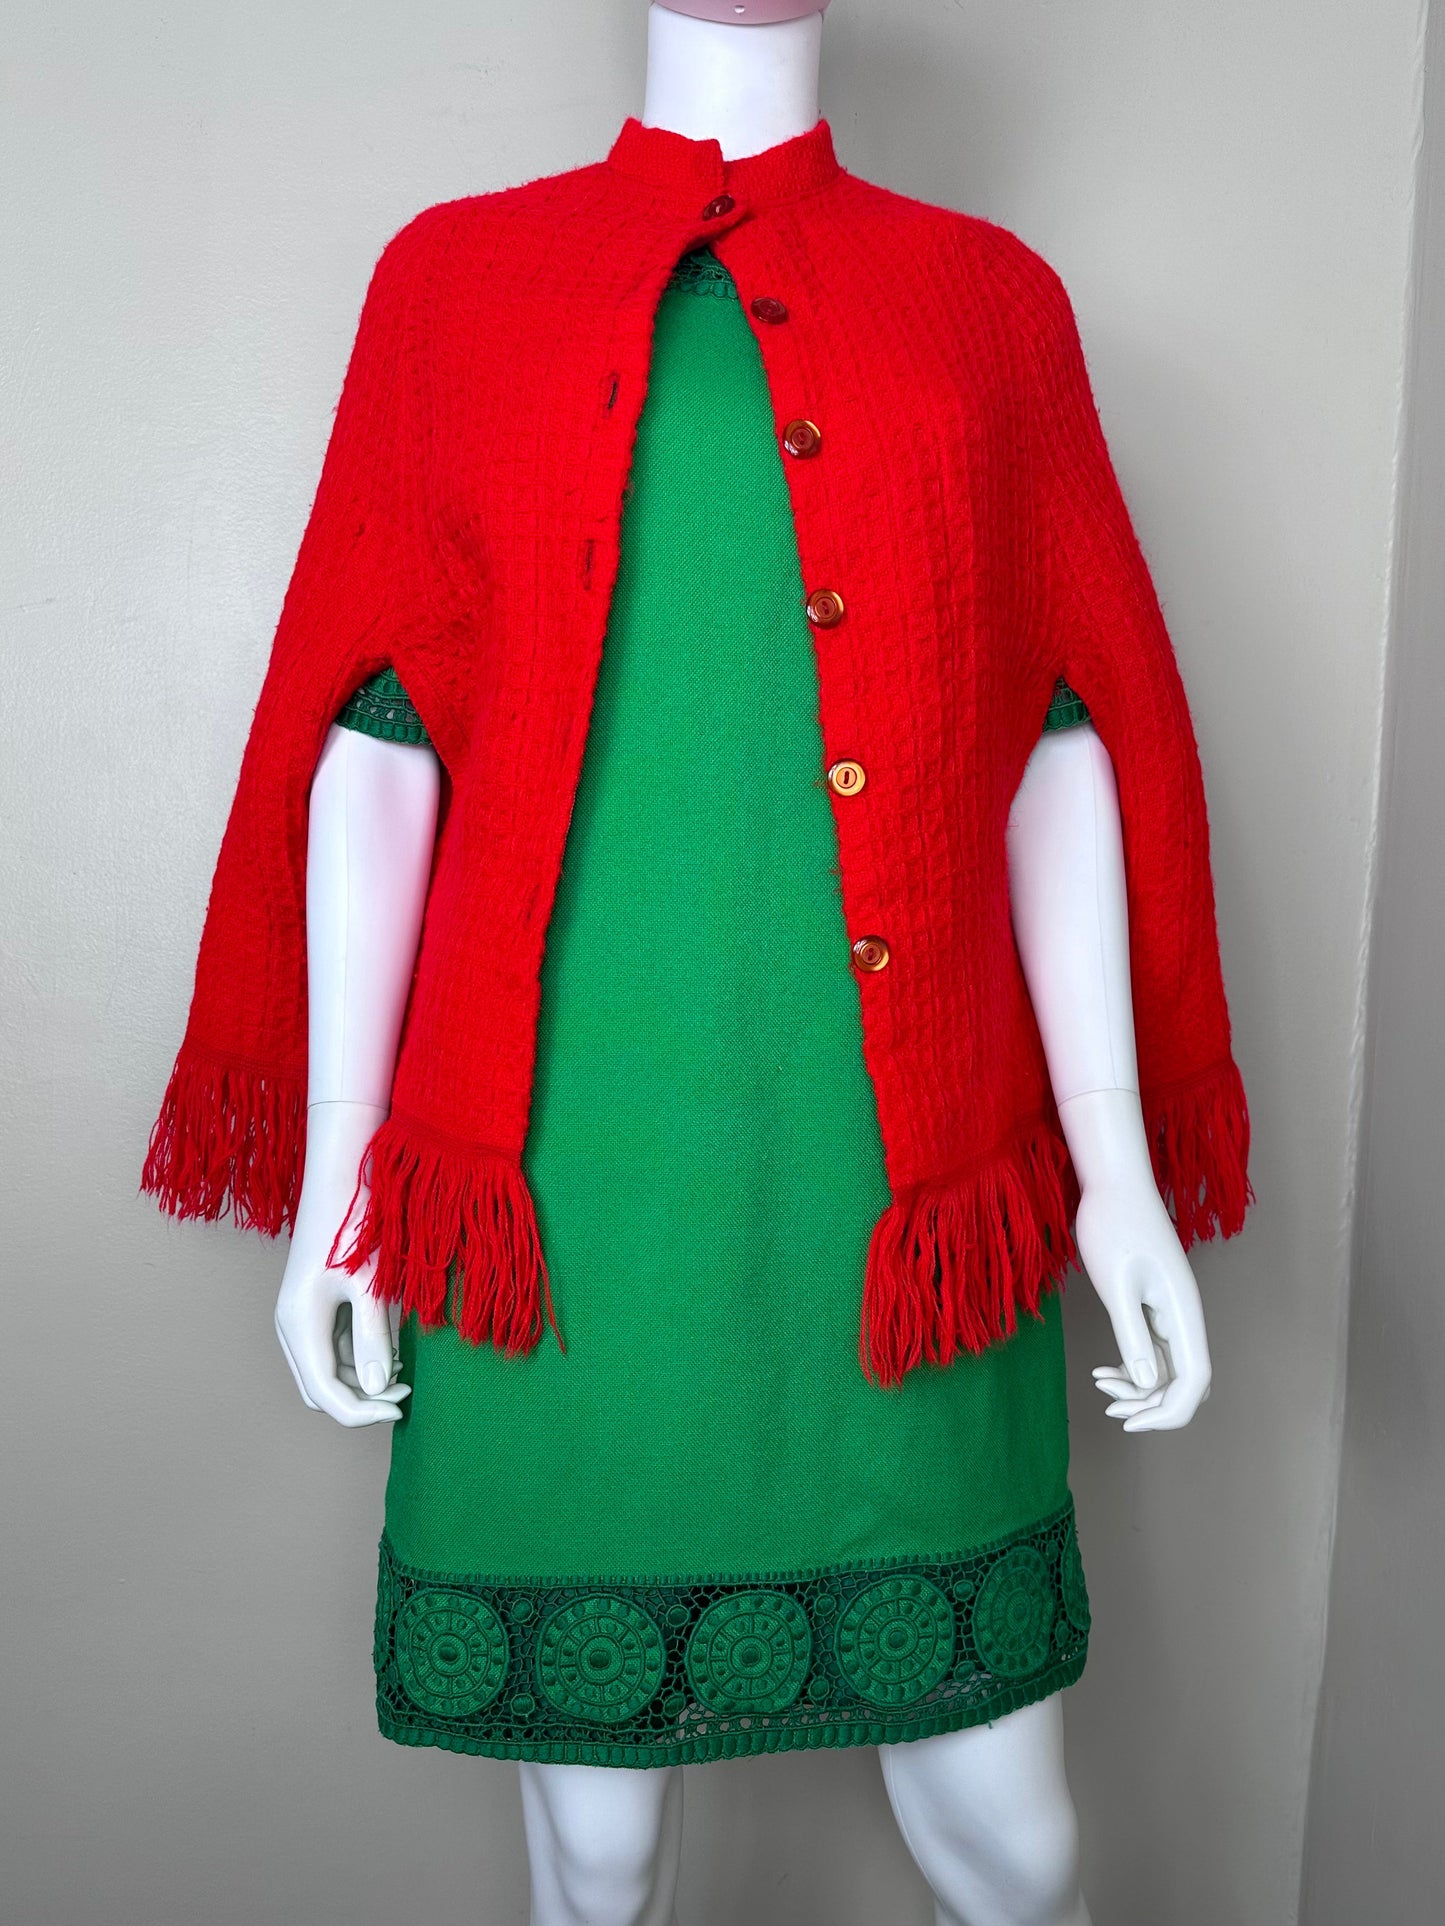 1970s Red Yarn Woven Cape with Fringe, Specialty House Fashion Size S-M, Sweater Poncho